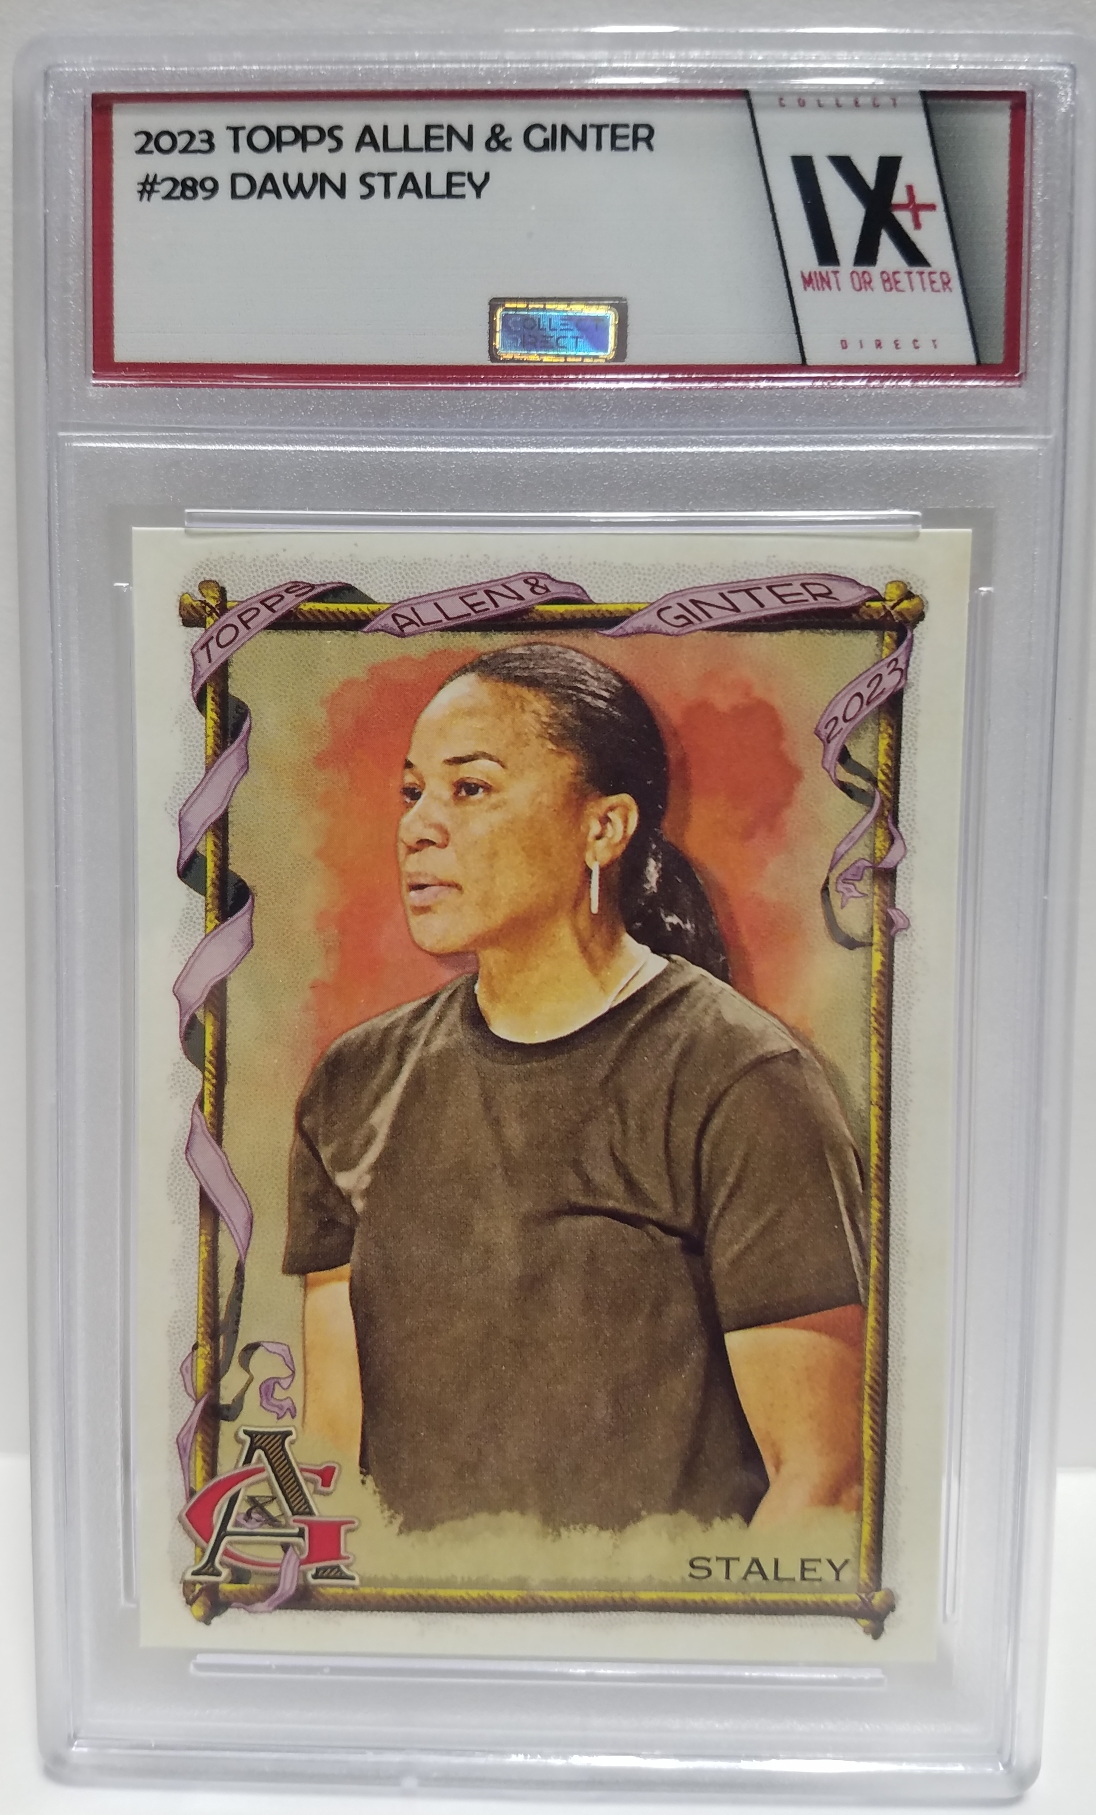 DAWN STALEY 2023 Topps Allen & Ginter #289 Collect Direct Graded Mint or Better WNBA Star Coach South Carolina Gamecocks